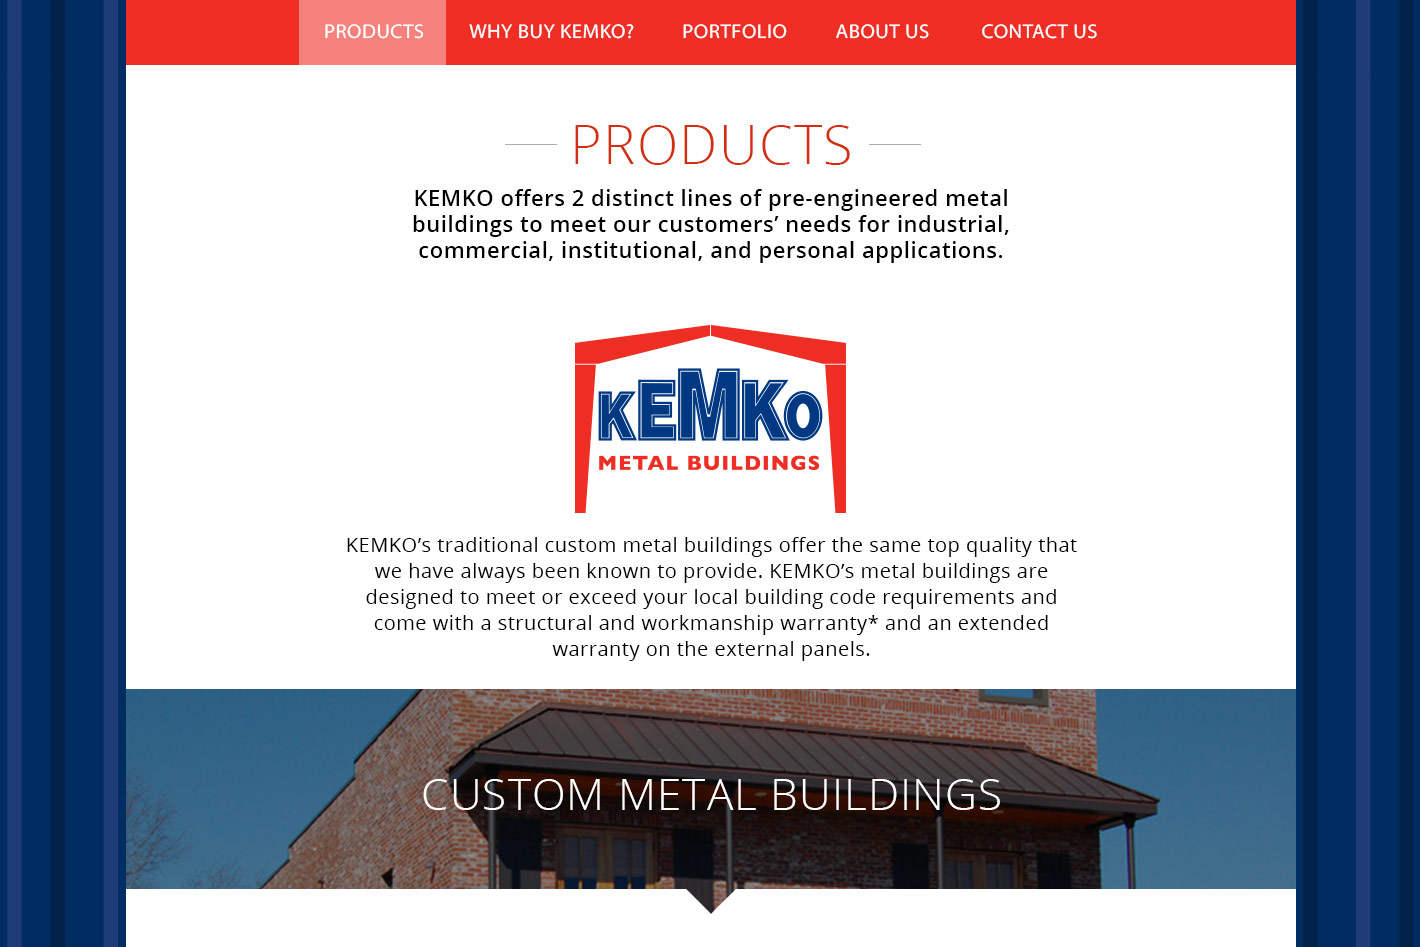 Kemko Products Section